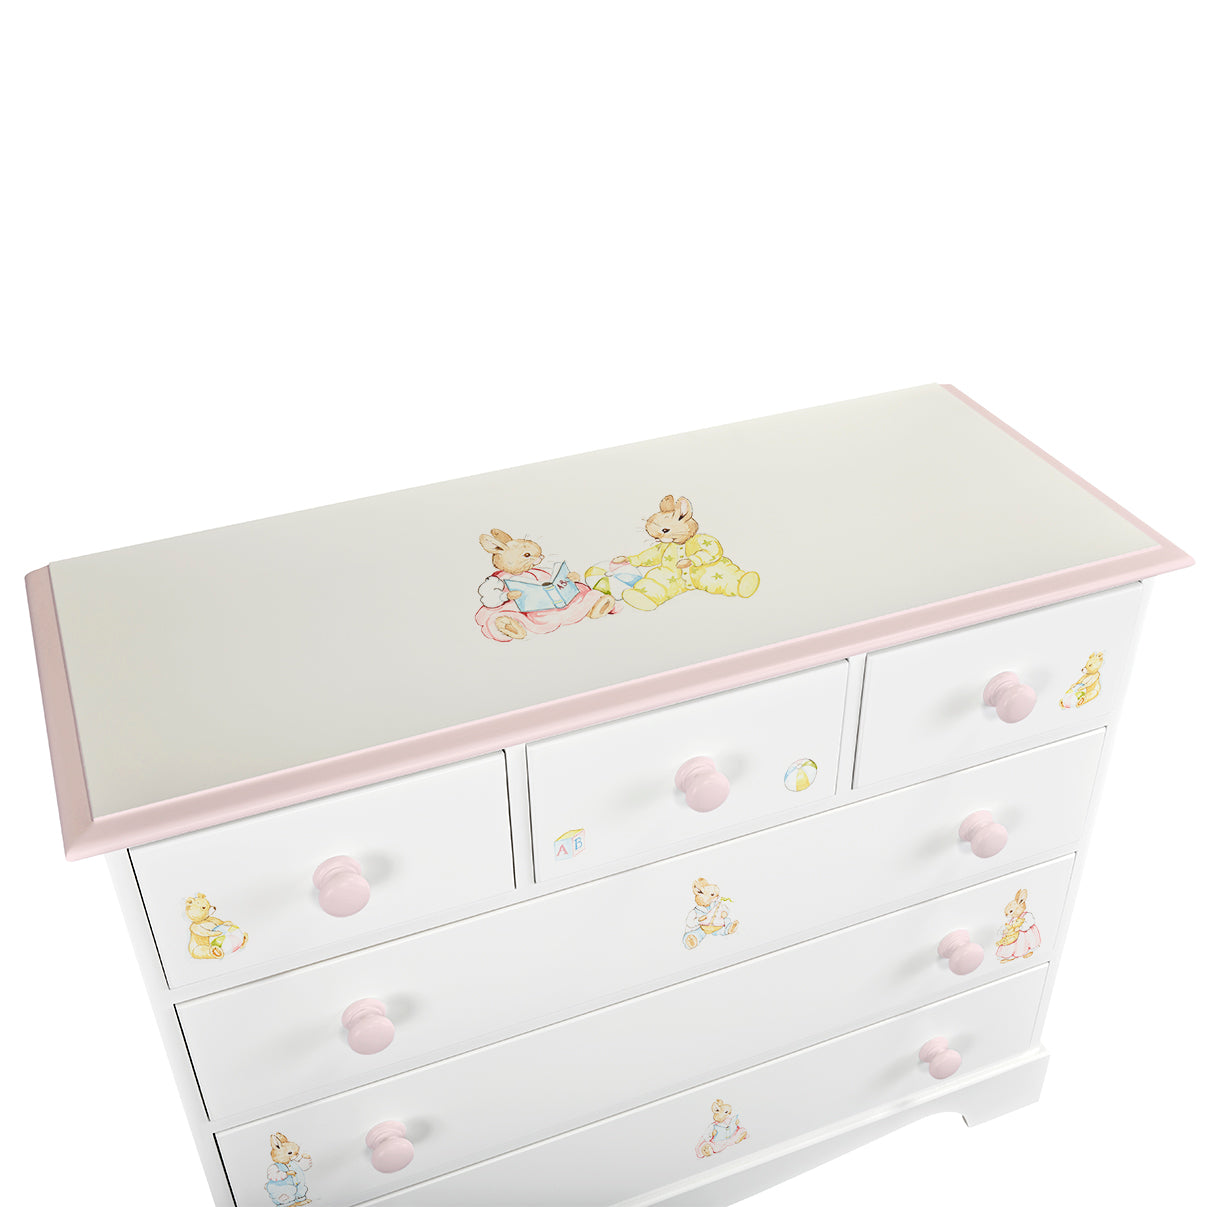 Extra Large Chest of Drawers - Barbara's Bunnies with Dragons Pink Trim